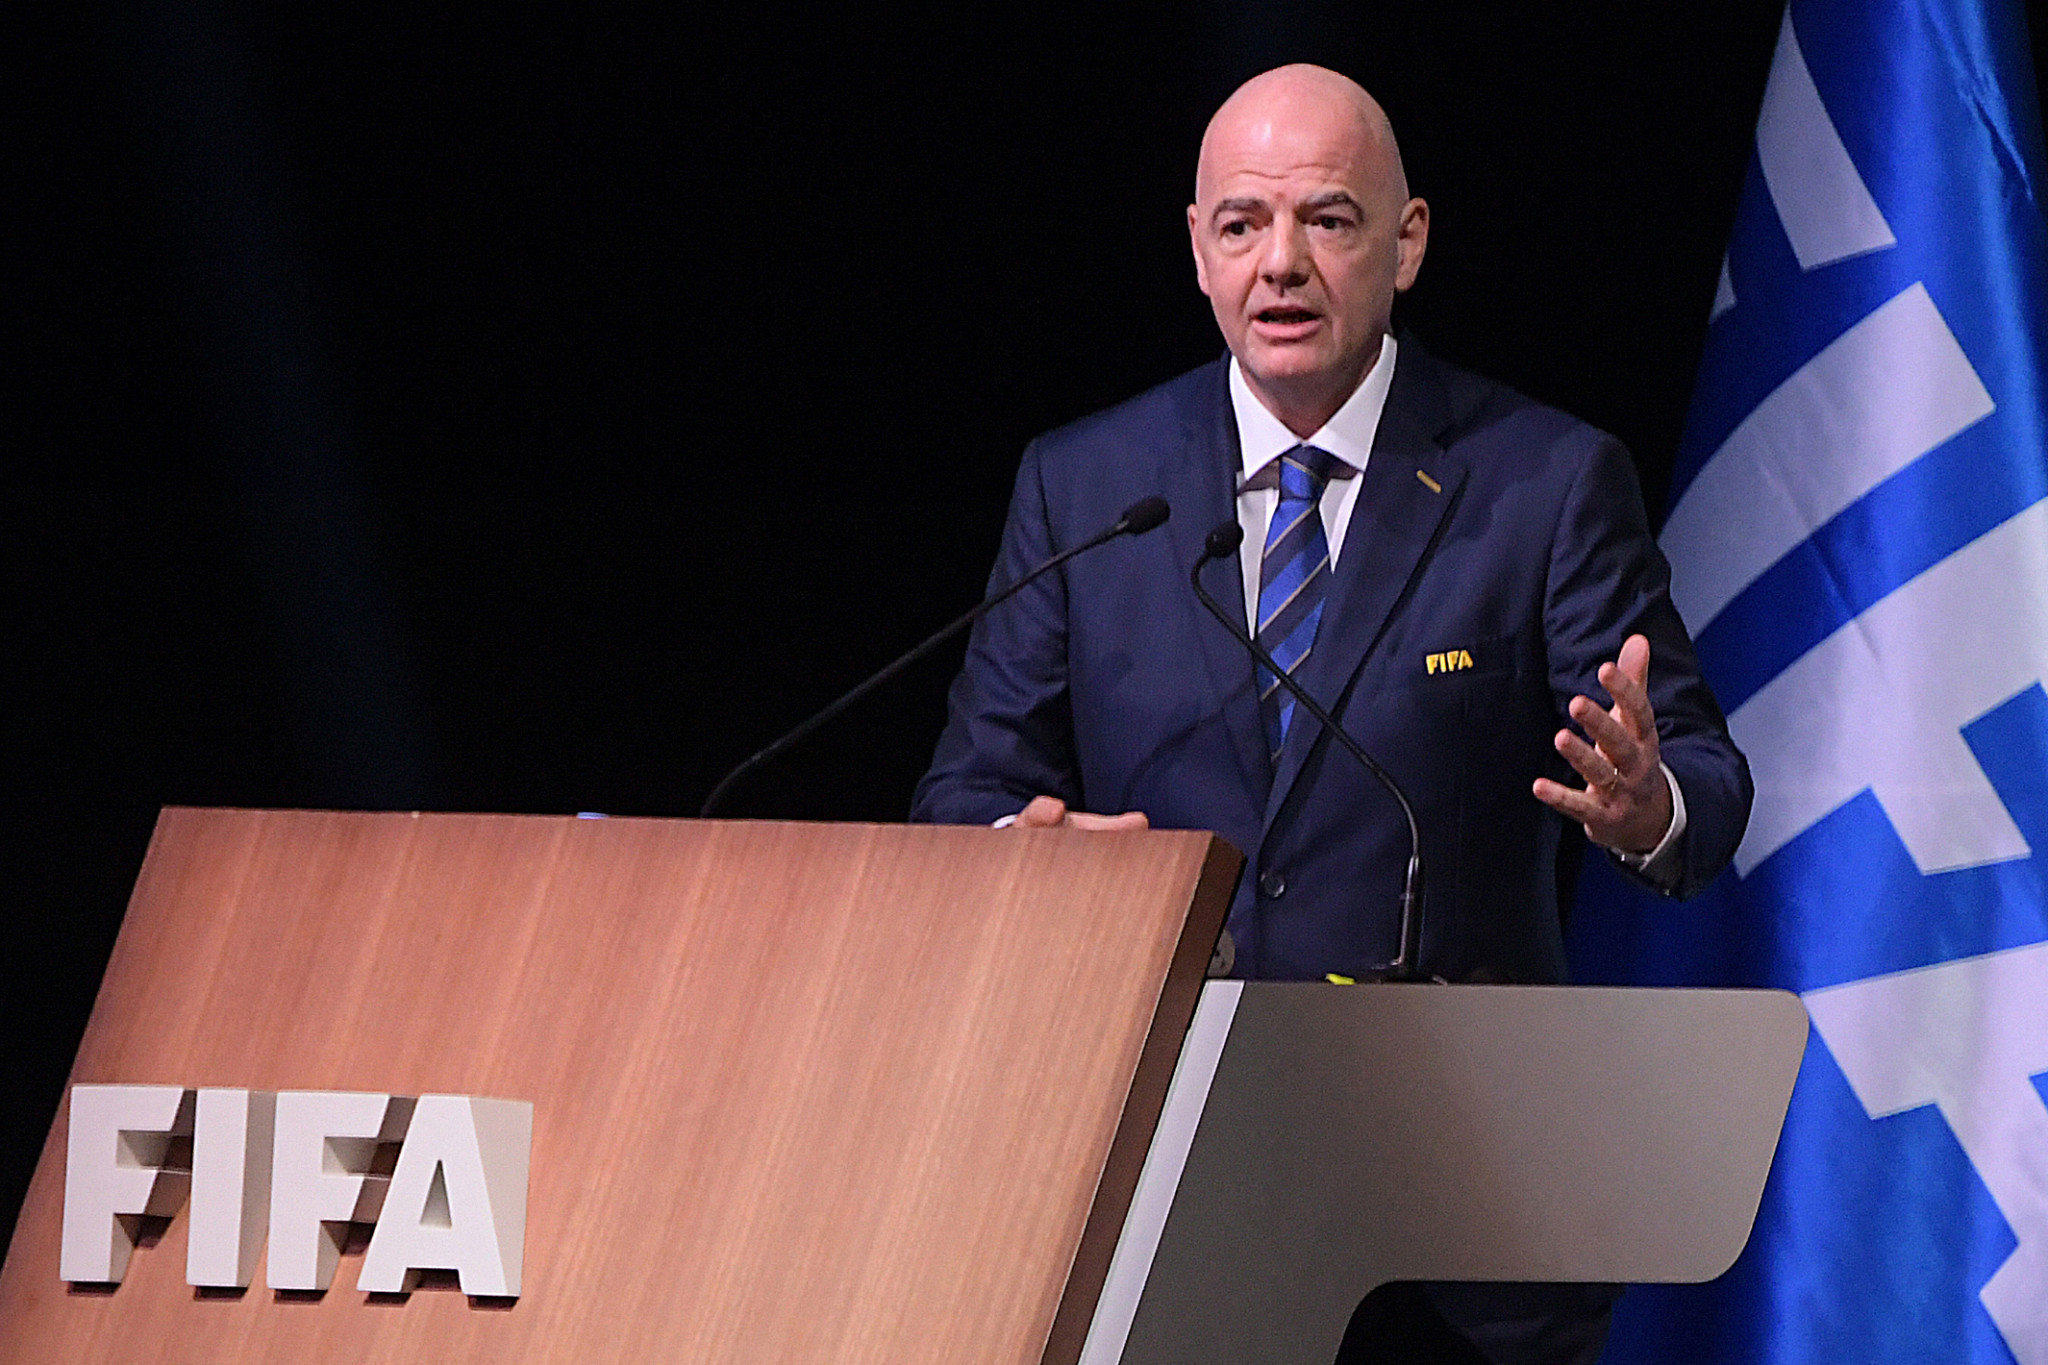 He also promised revenues of $11 billion for FIFA in the next four-year cycle, and there are plans for more football including an expanded men's Club World Cup from 2025 ©Getty Images